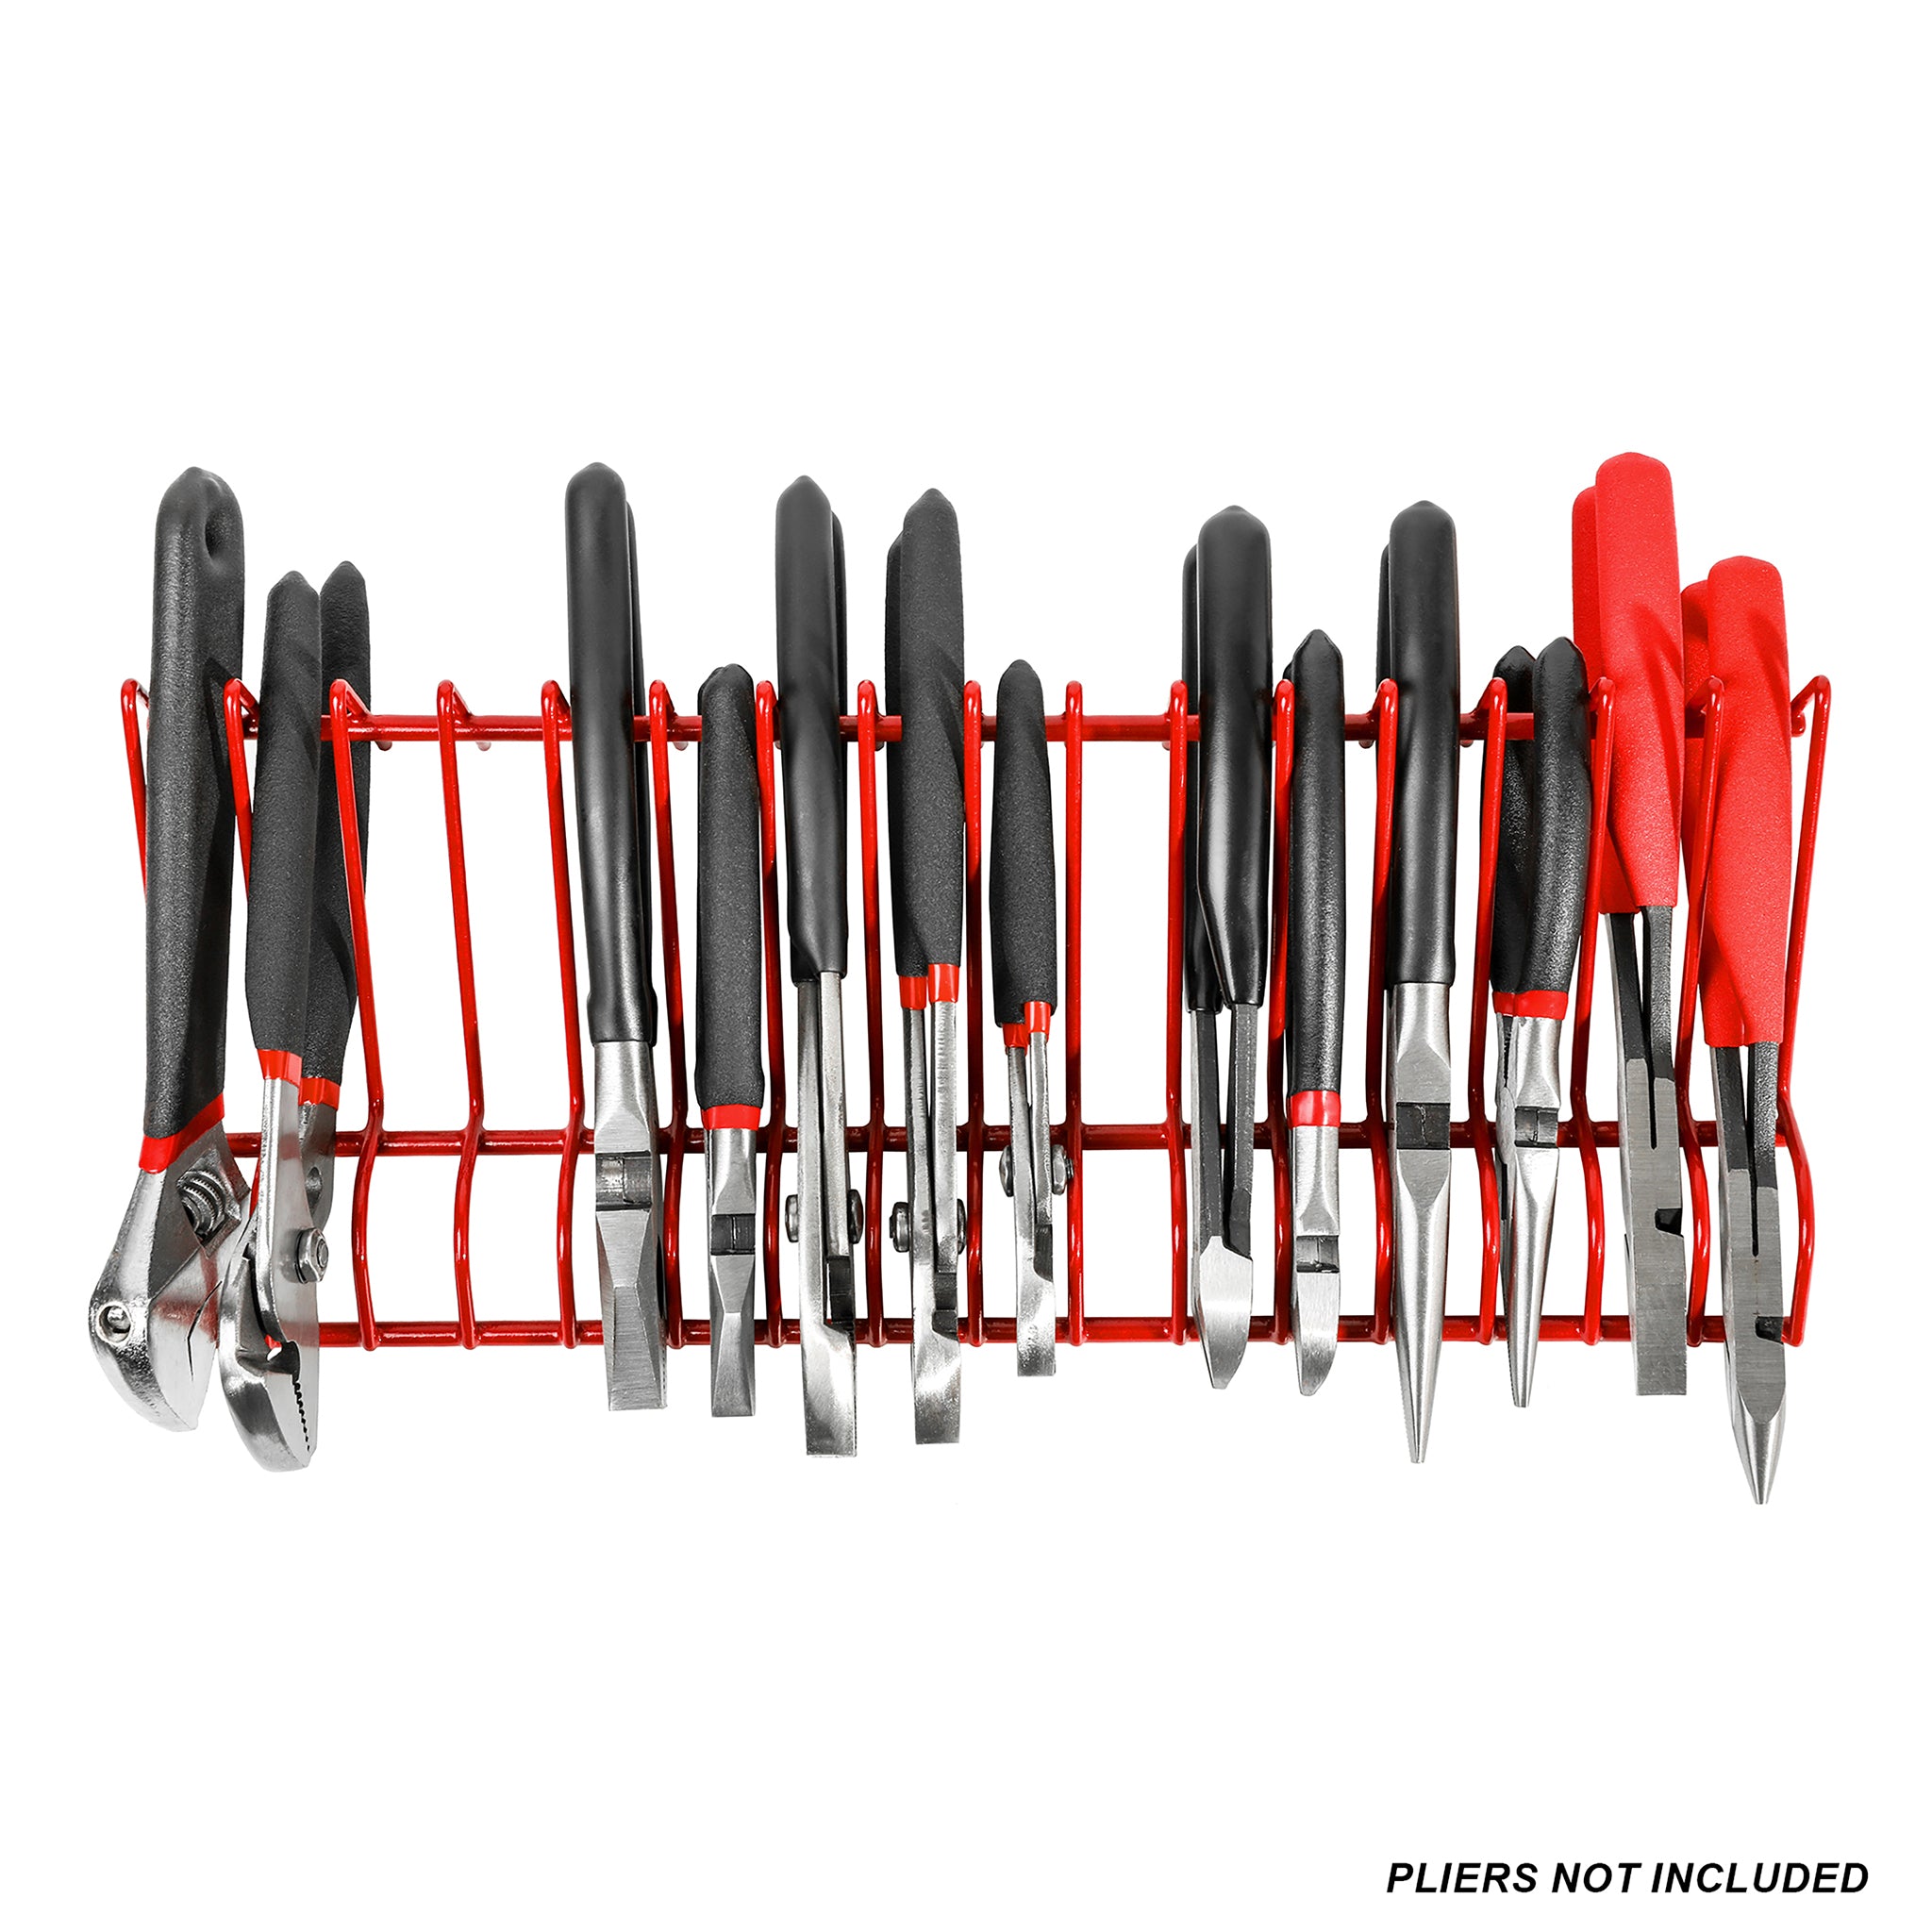 ARES Tool 🔧 Red & Green 10-Slot Pliers Organizer Racks 62048-62051 🧰 Made  in USA 🇺🇸 